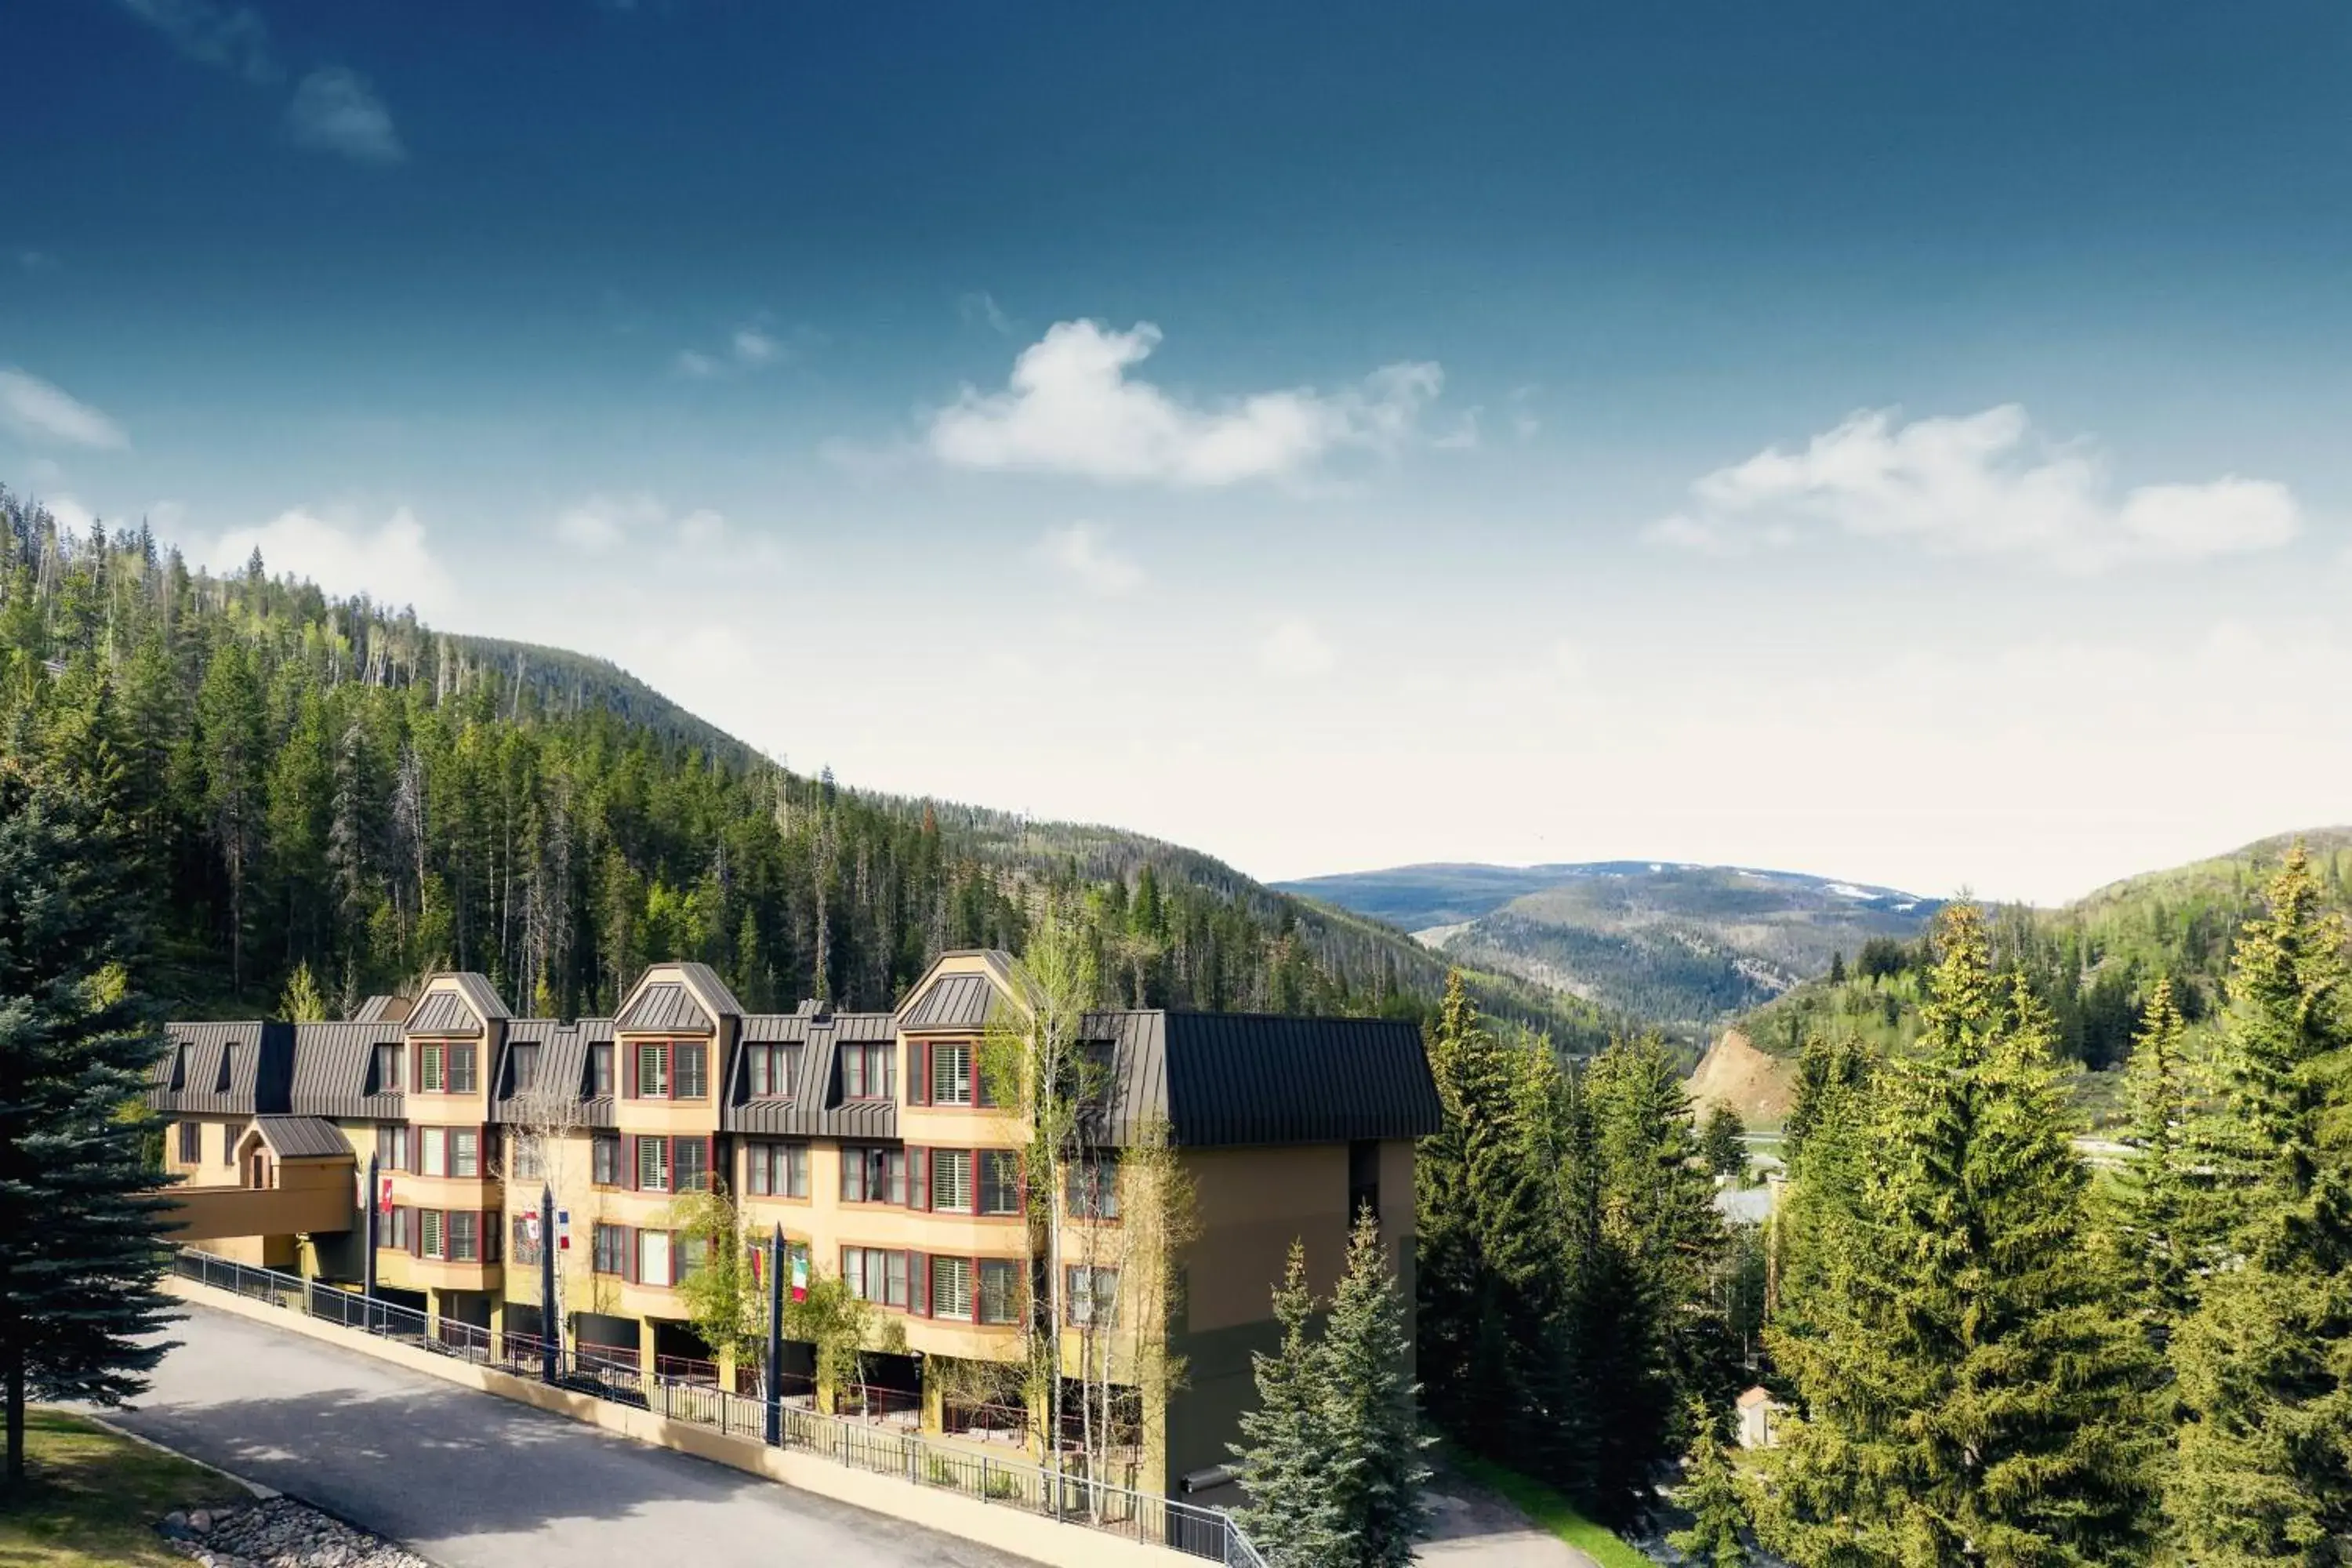 Property building in Marriott's Streamside Evergreen At Vail